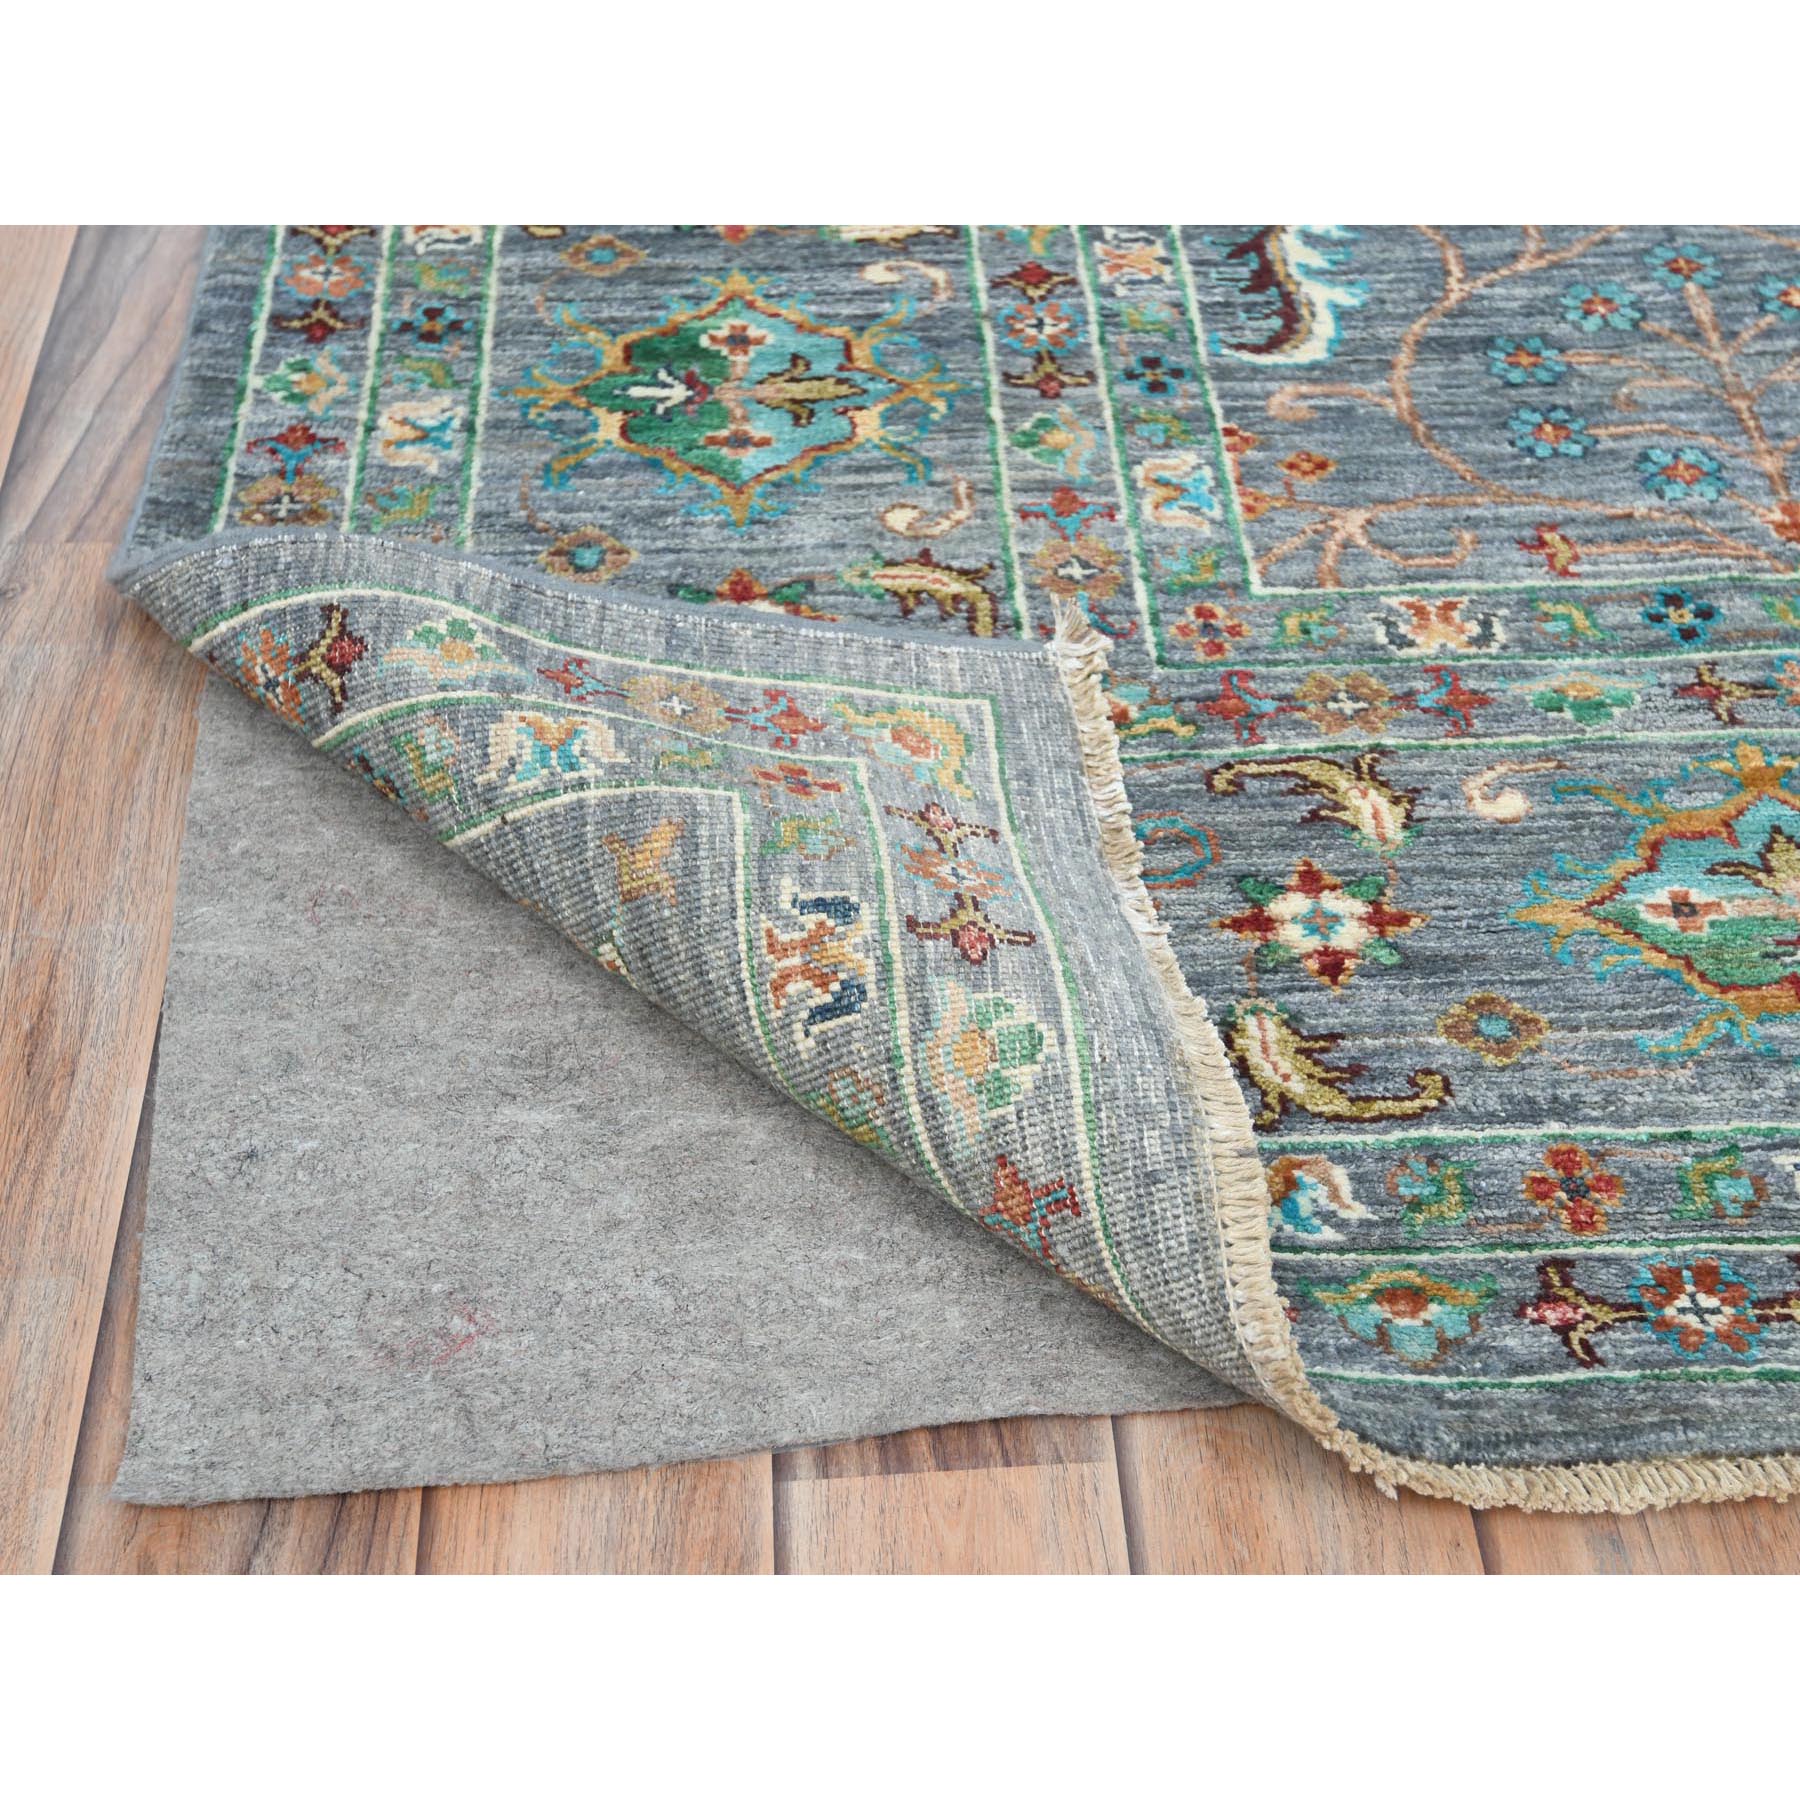 8'3"x11'4" Silver Blue, Dense Weave Pure Wool, Hand Woven Fine Peshawar with Mahal Design, Natural Dyes, Oriental Rug 